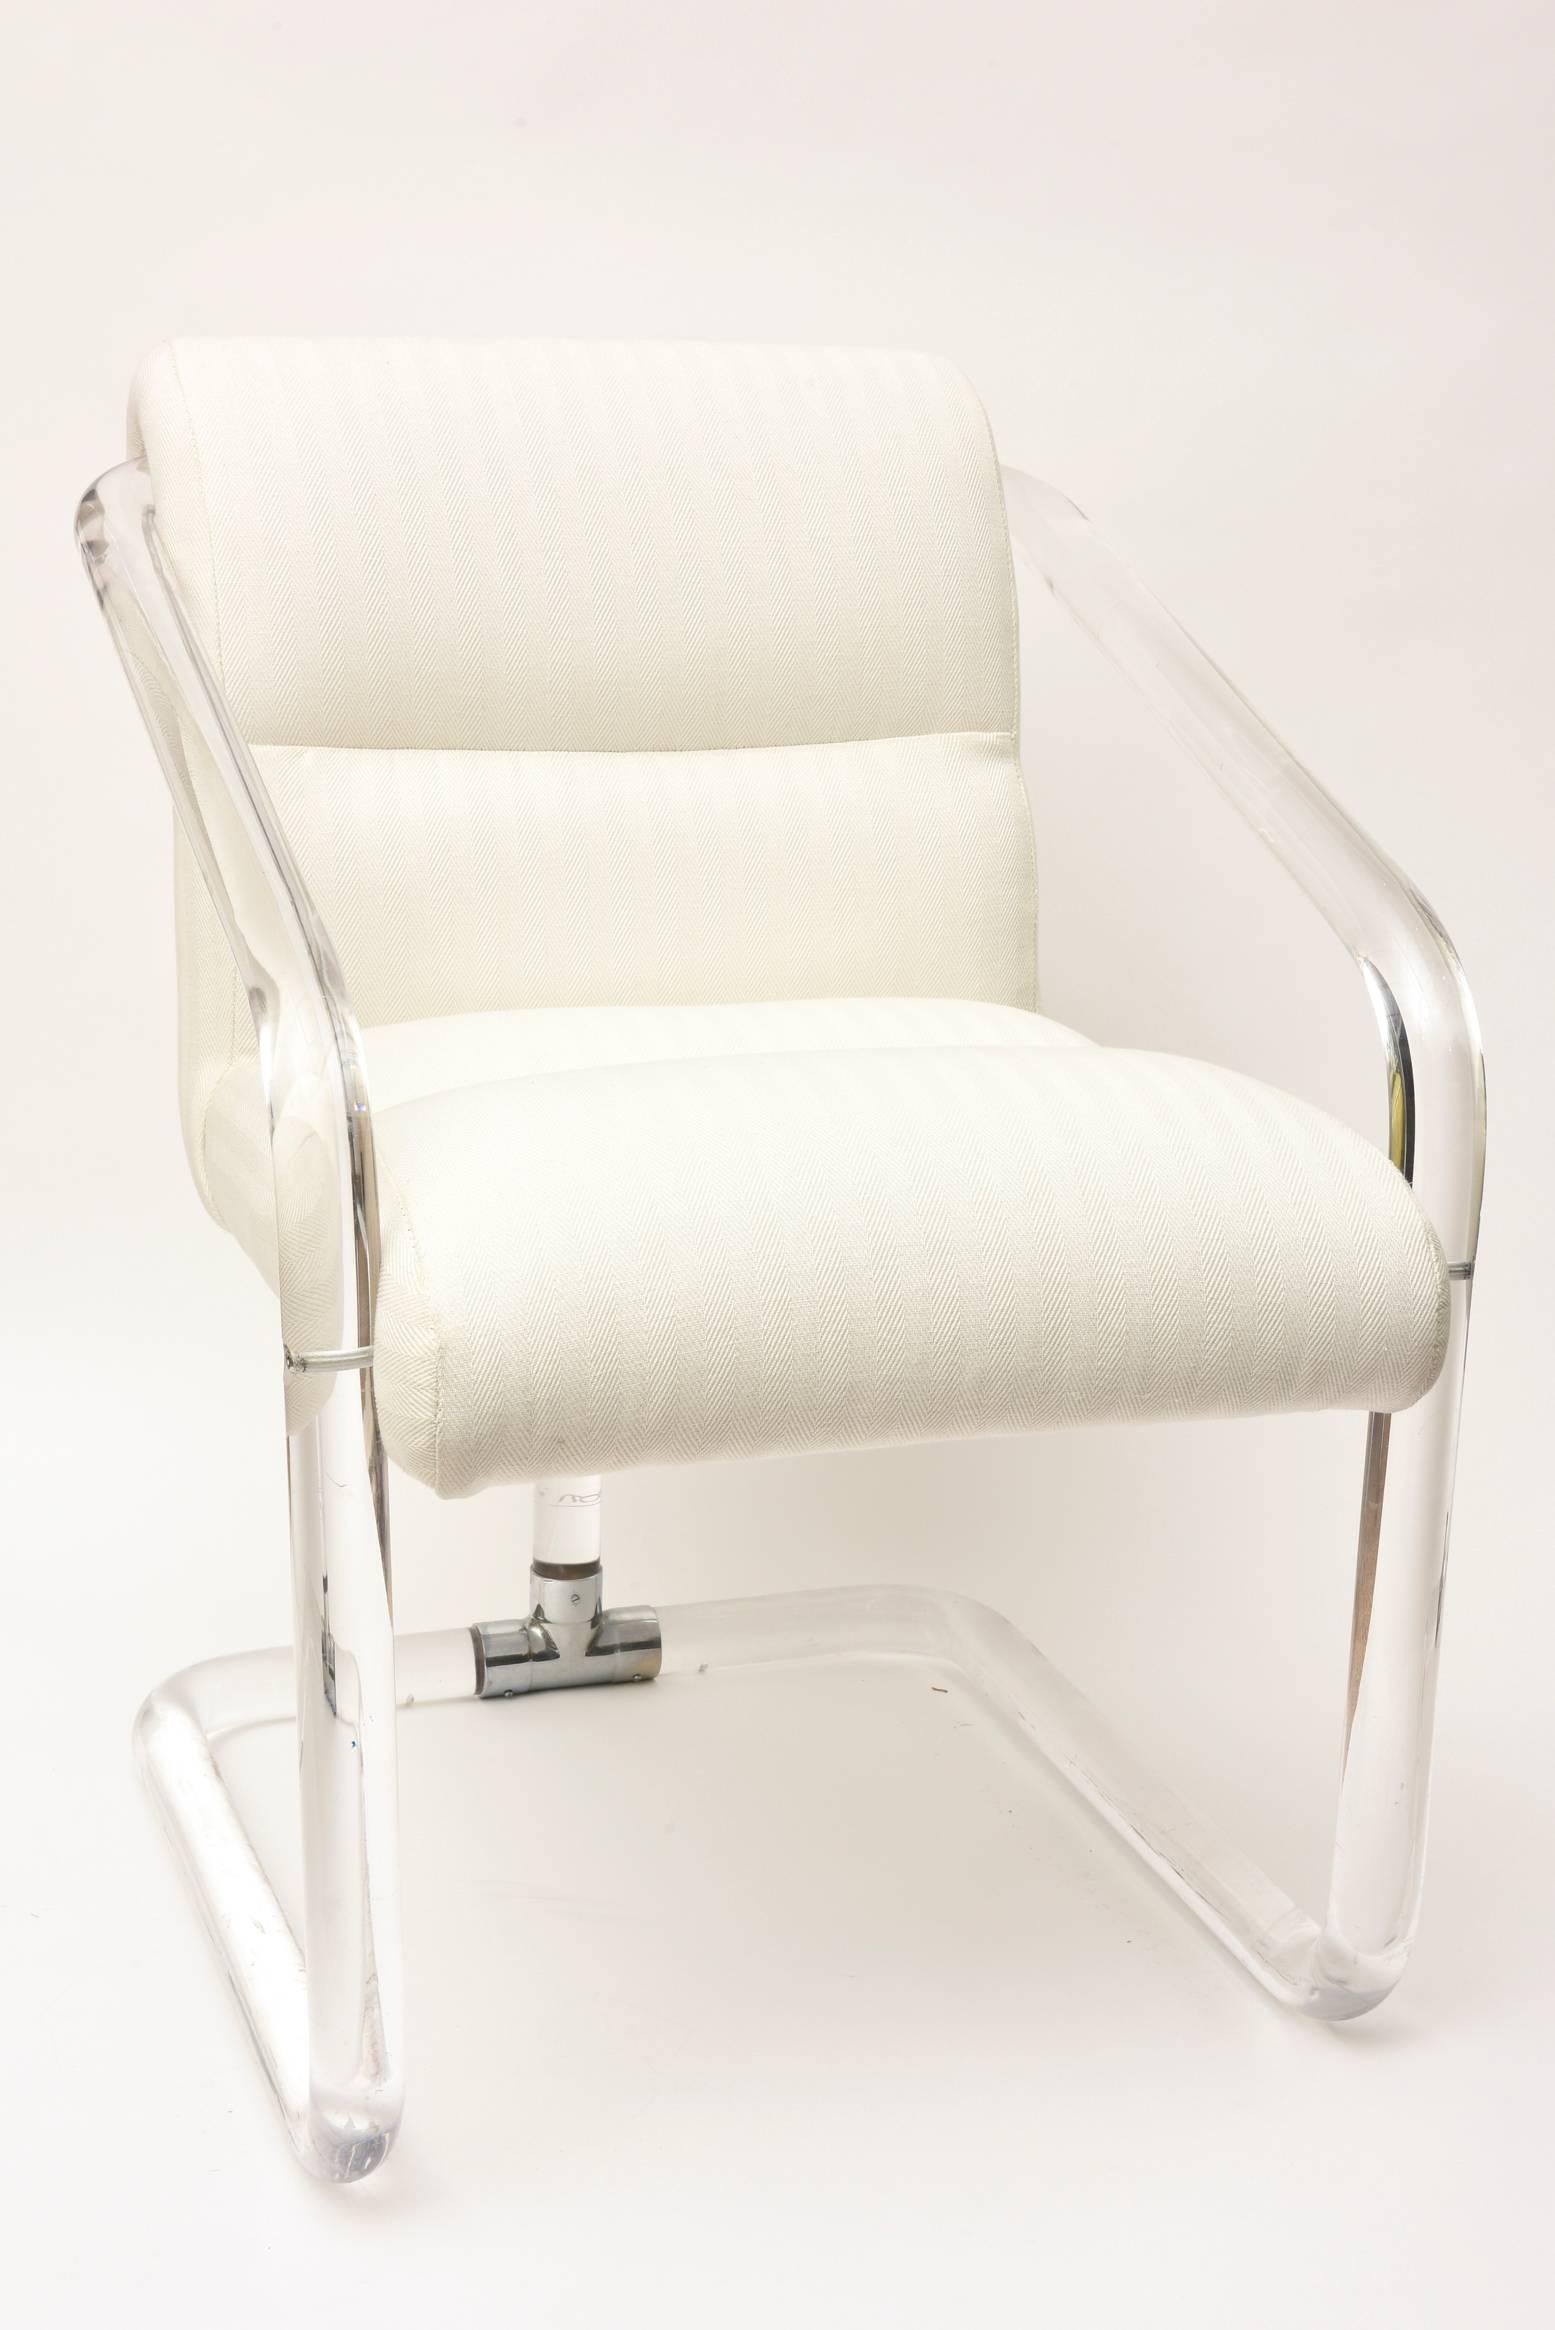 This very comfortable signed vintage Lion In Frost channelled Lucite and chrome side, desk or vanity chair is very modern.
It has been re-upholstered in a white on white chevron style fabric.
The seat depth is 18.5.
Seat height is 15.5